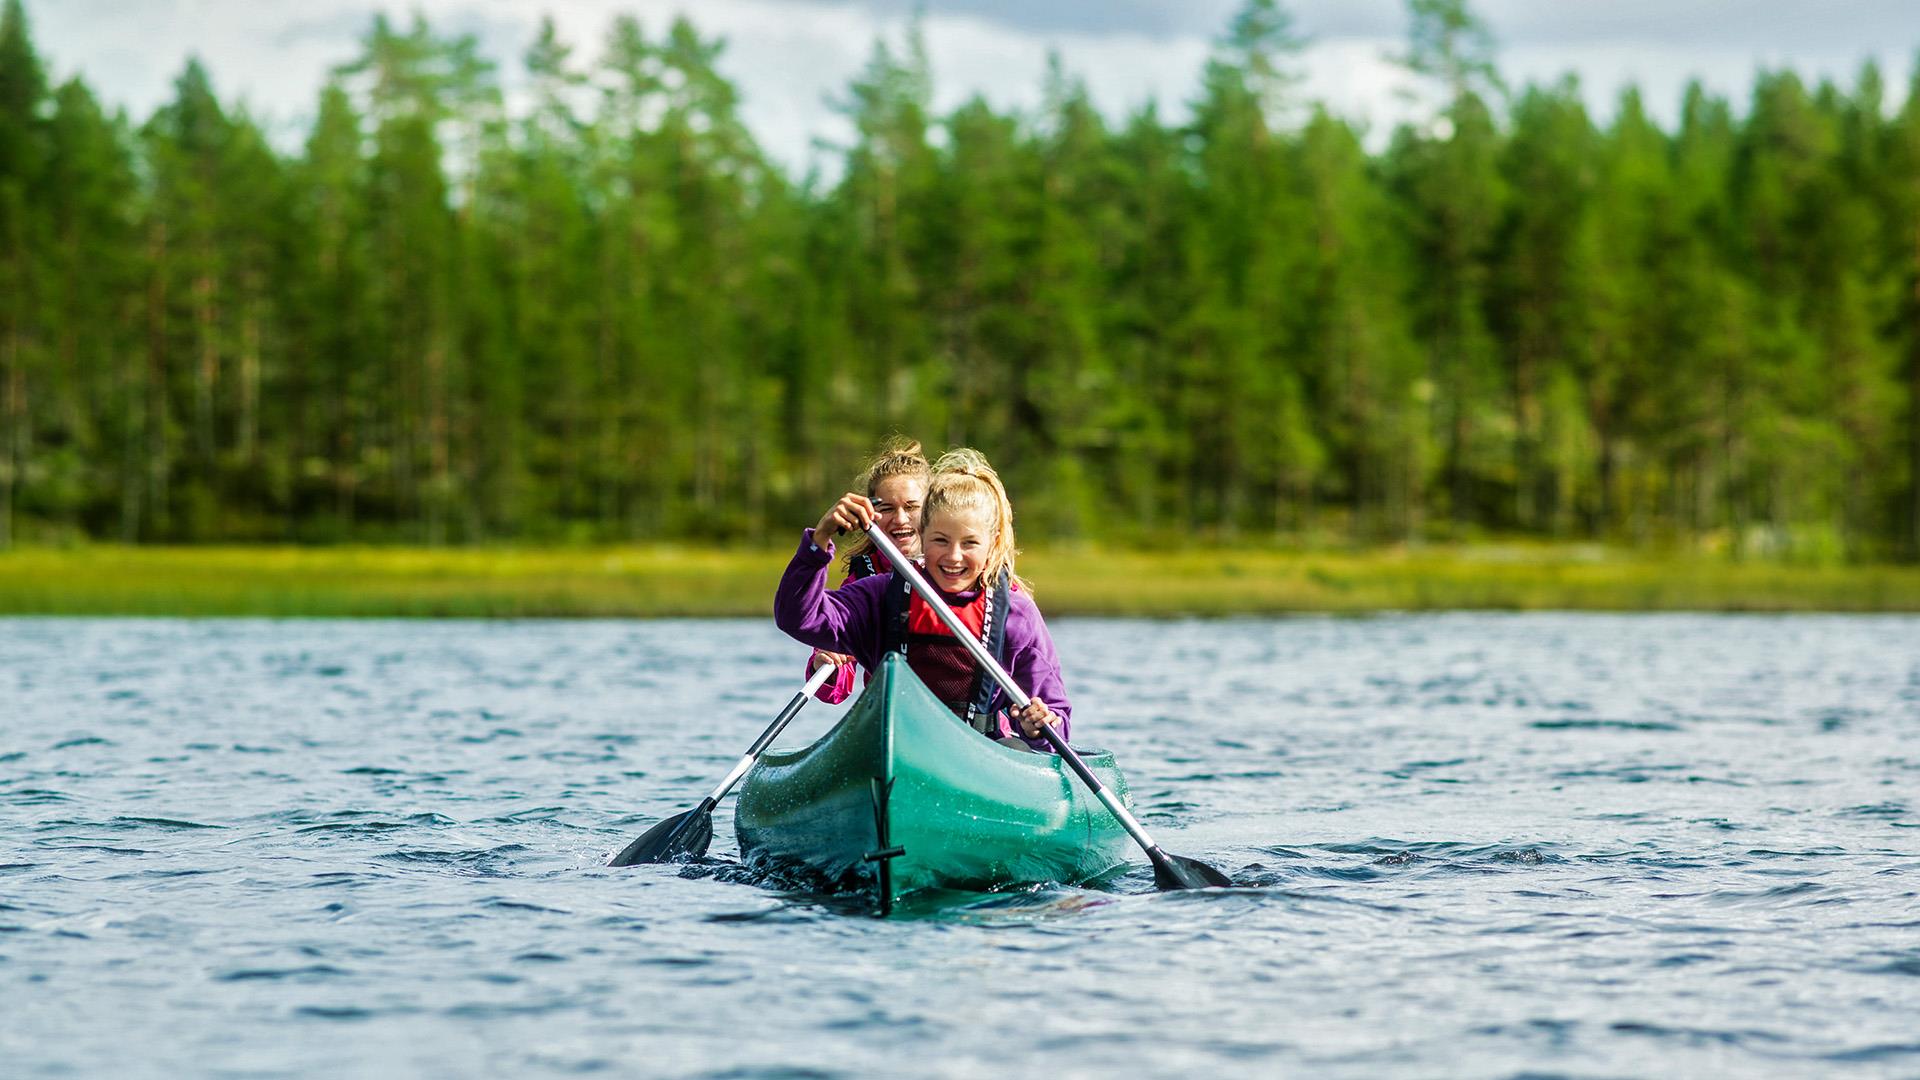 Canoeing at Fjorda - good vibes